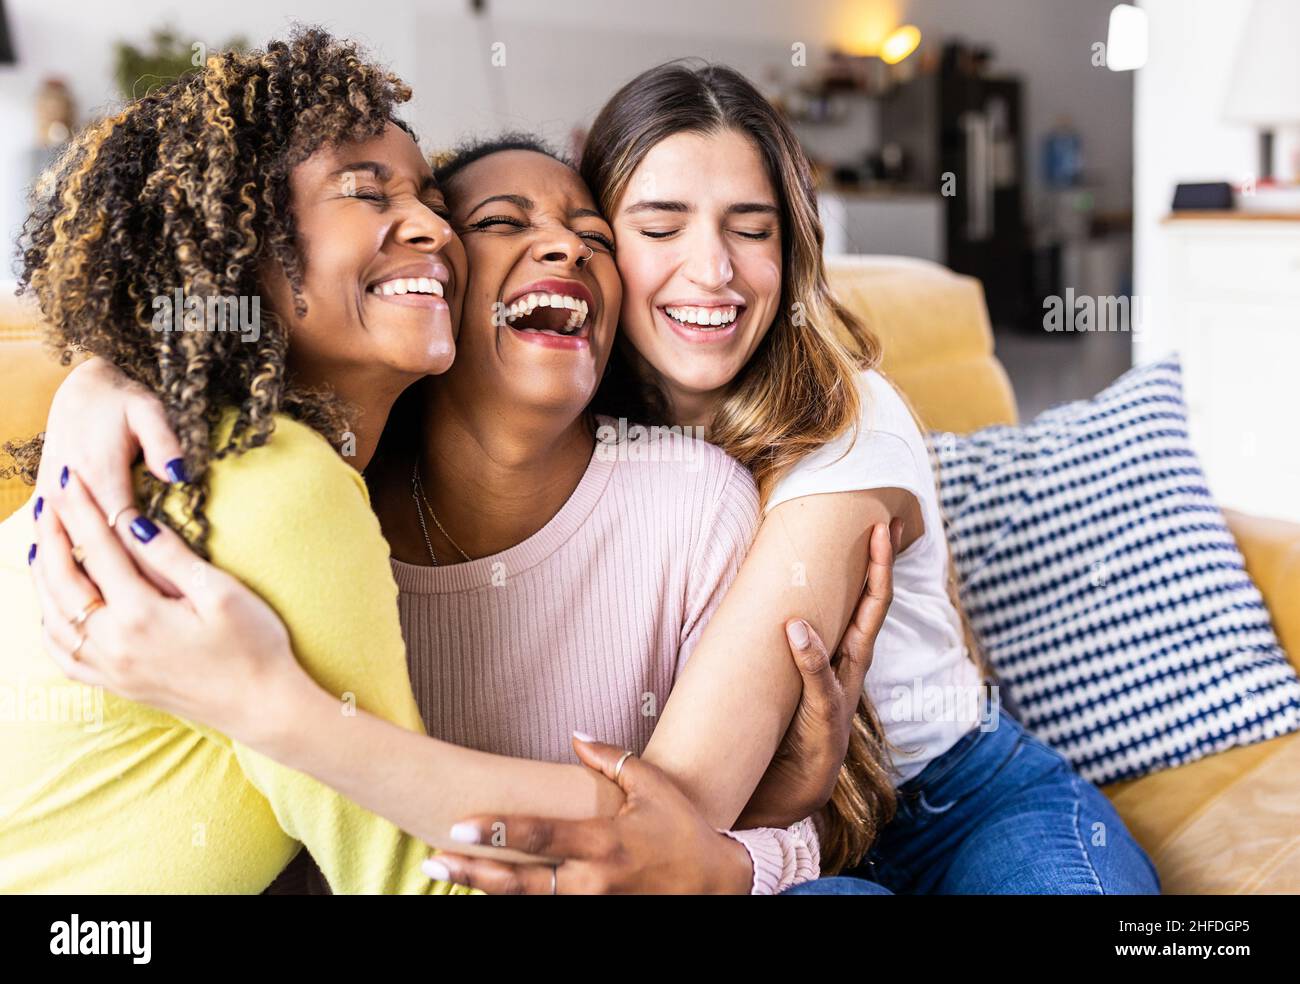 Three happy multiethnic female best friends laughing together at home Stock Photo